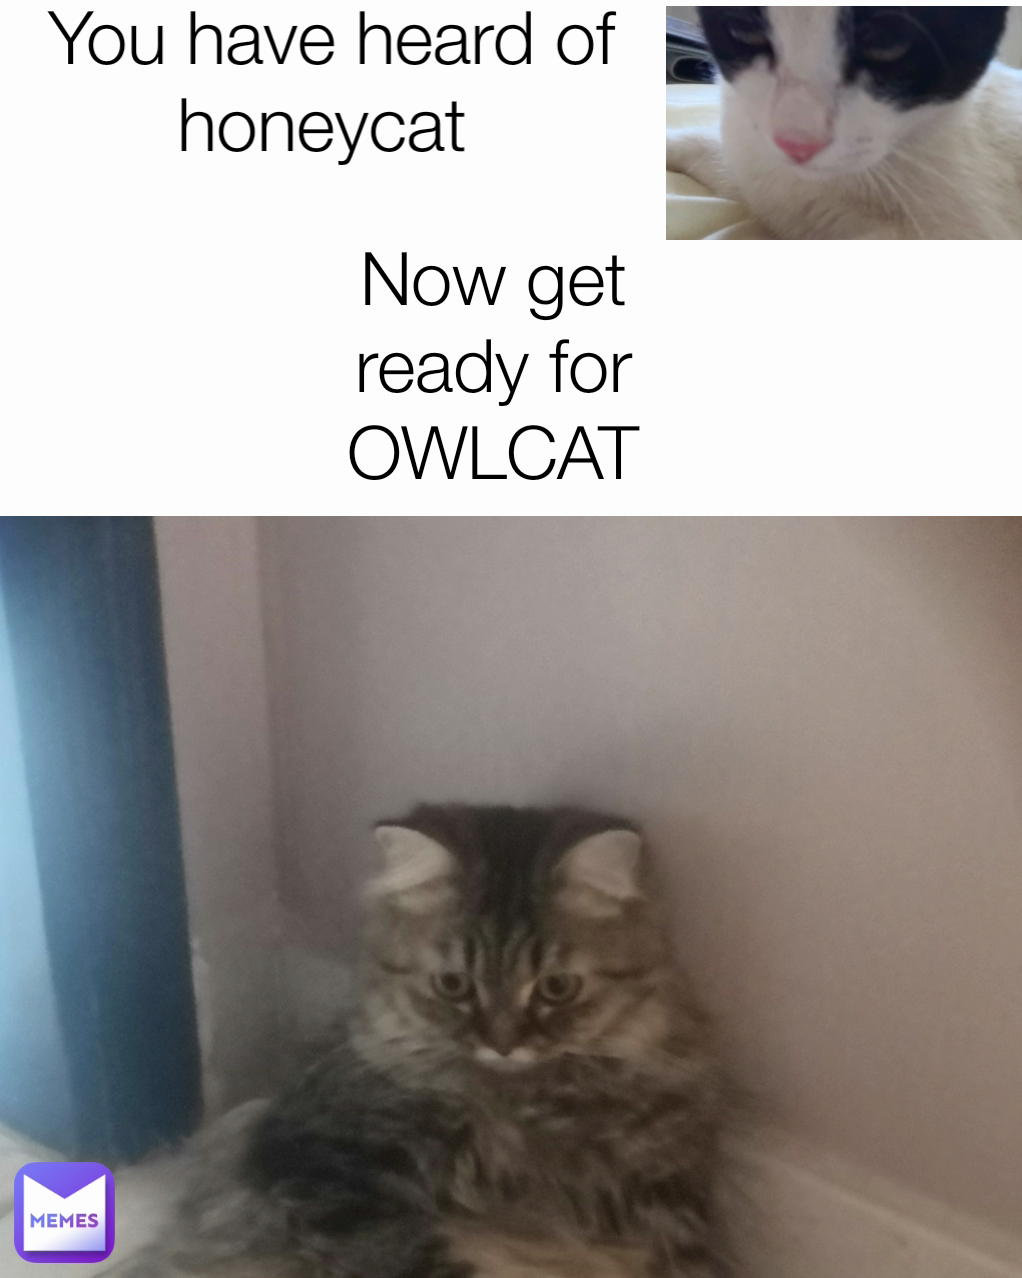 Now get ready for
OWLCAT


 You have heard of honeycat  OwlCat